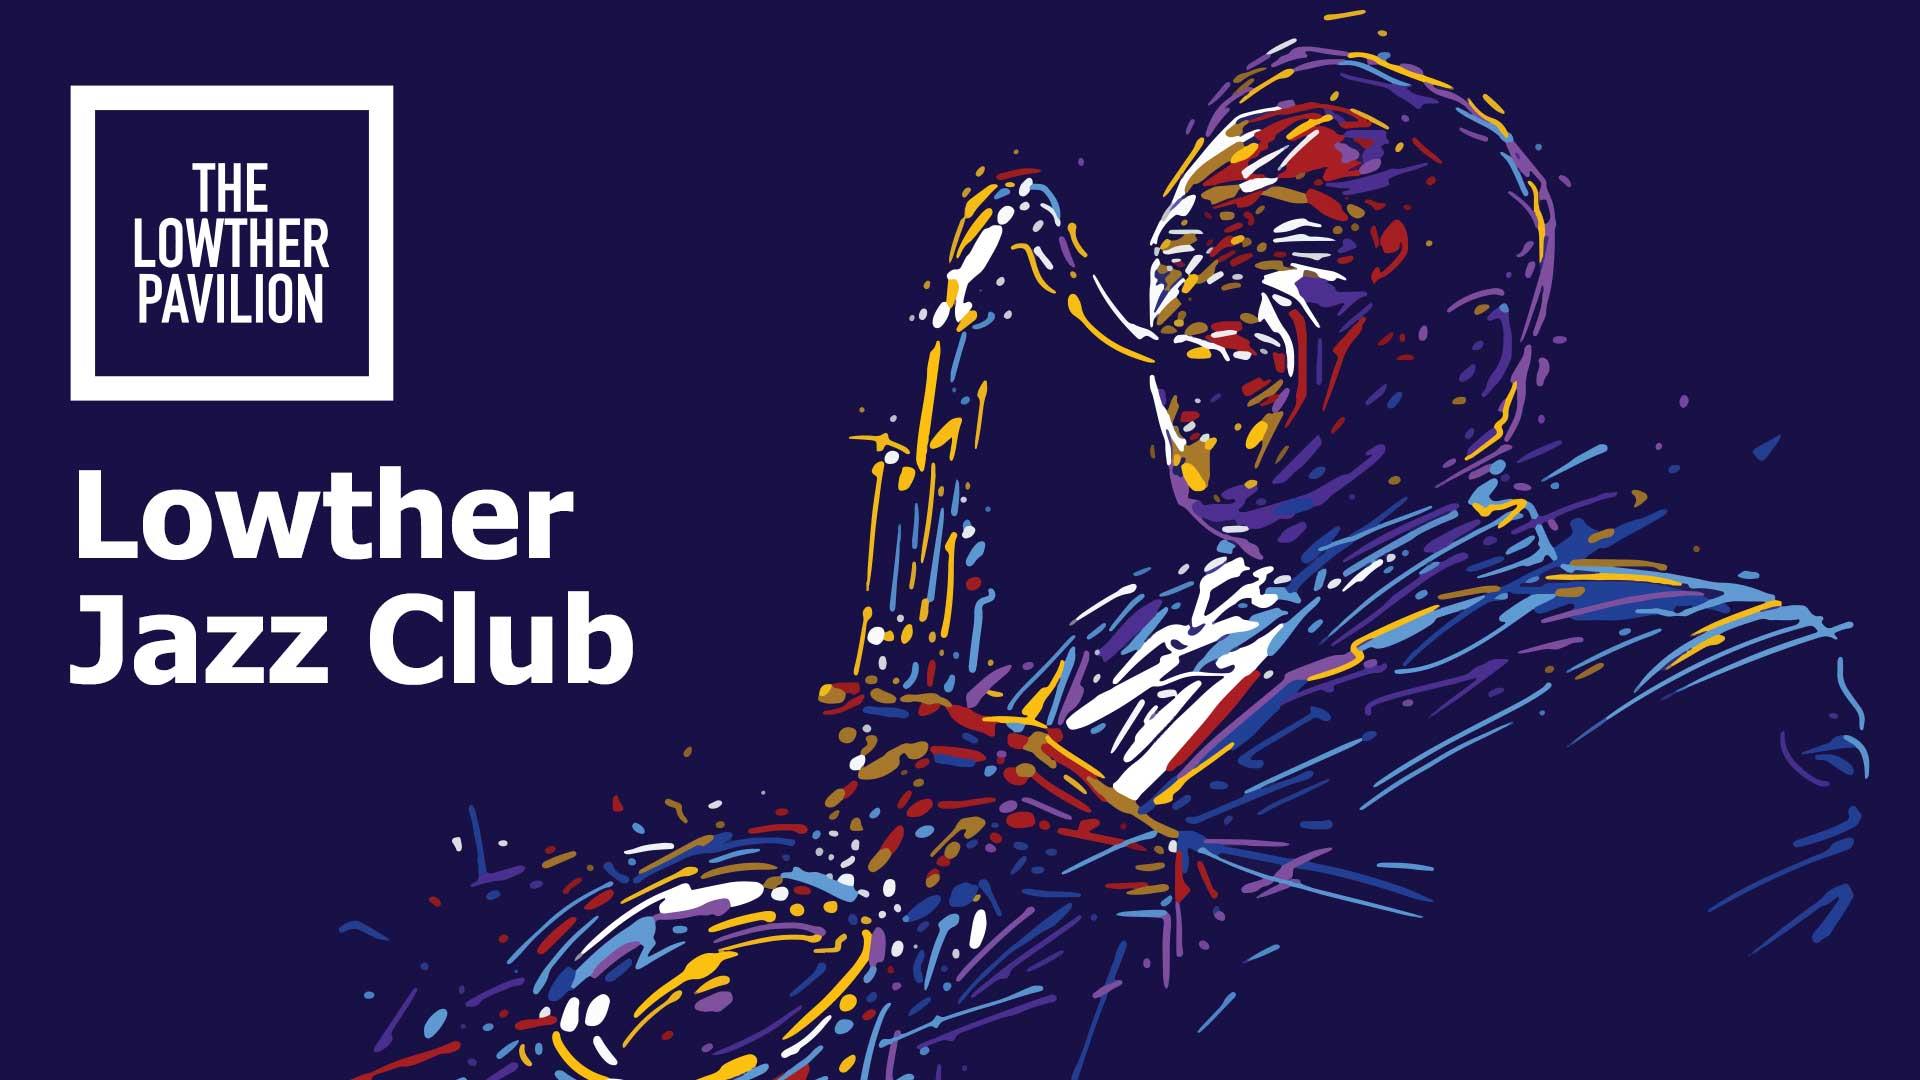 Lowther Jazz Club – February 2022 - Lowther Pavilion